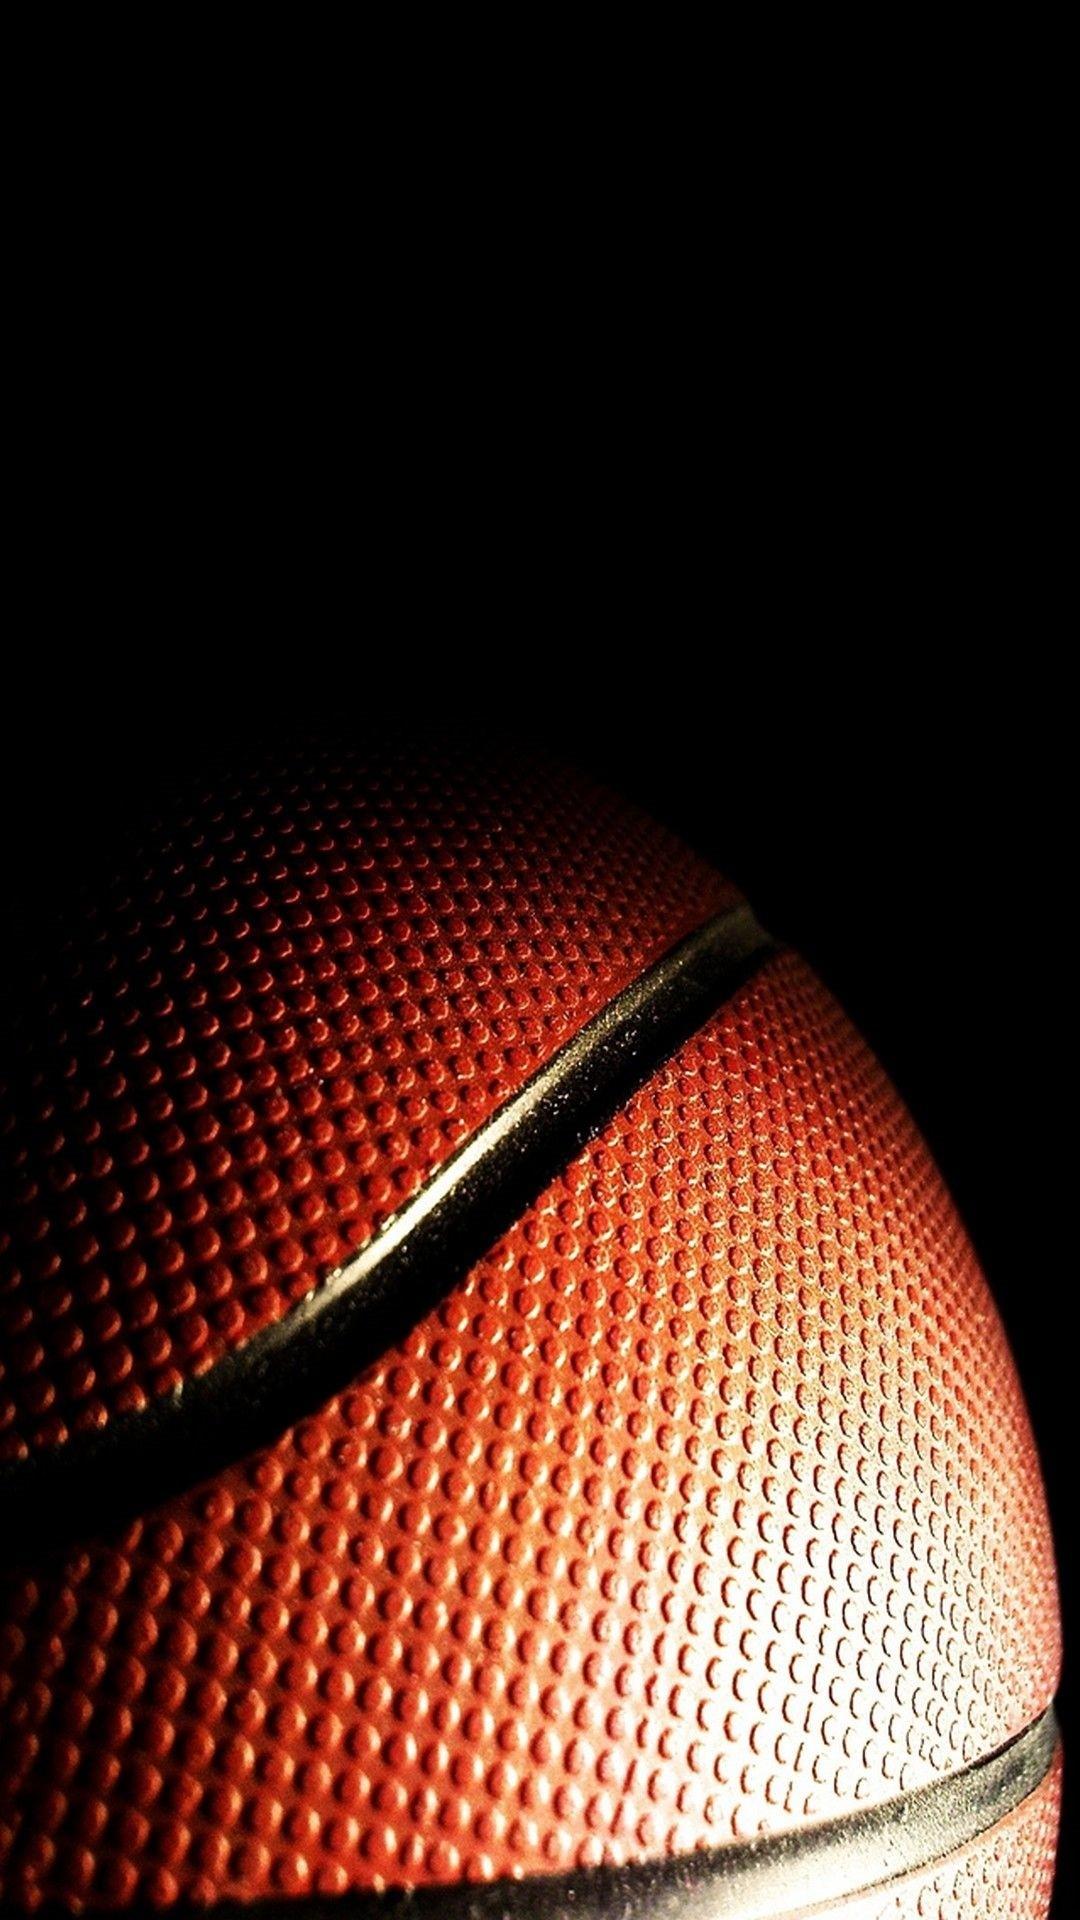 1080 x 1920 · jpeg - Basketball iPhone Wallpapers (23+ images) - WallpaperBoat